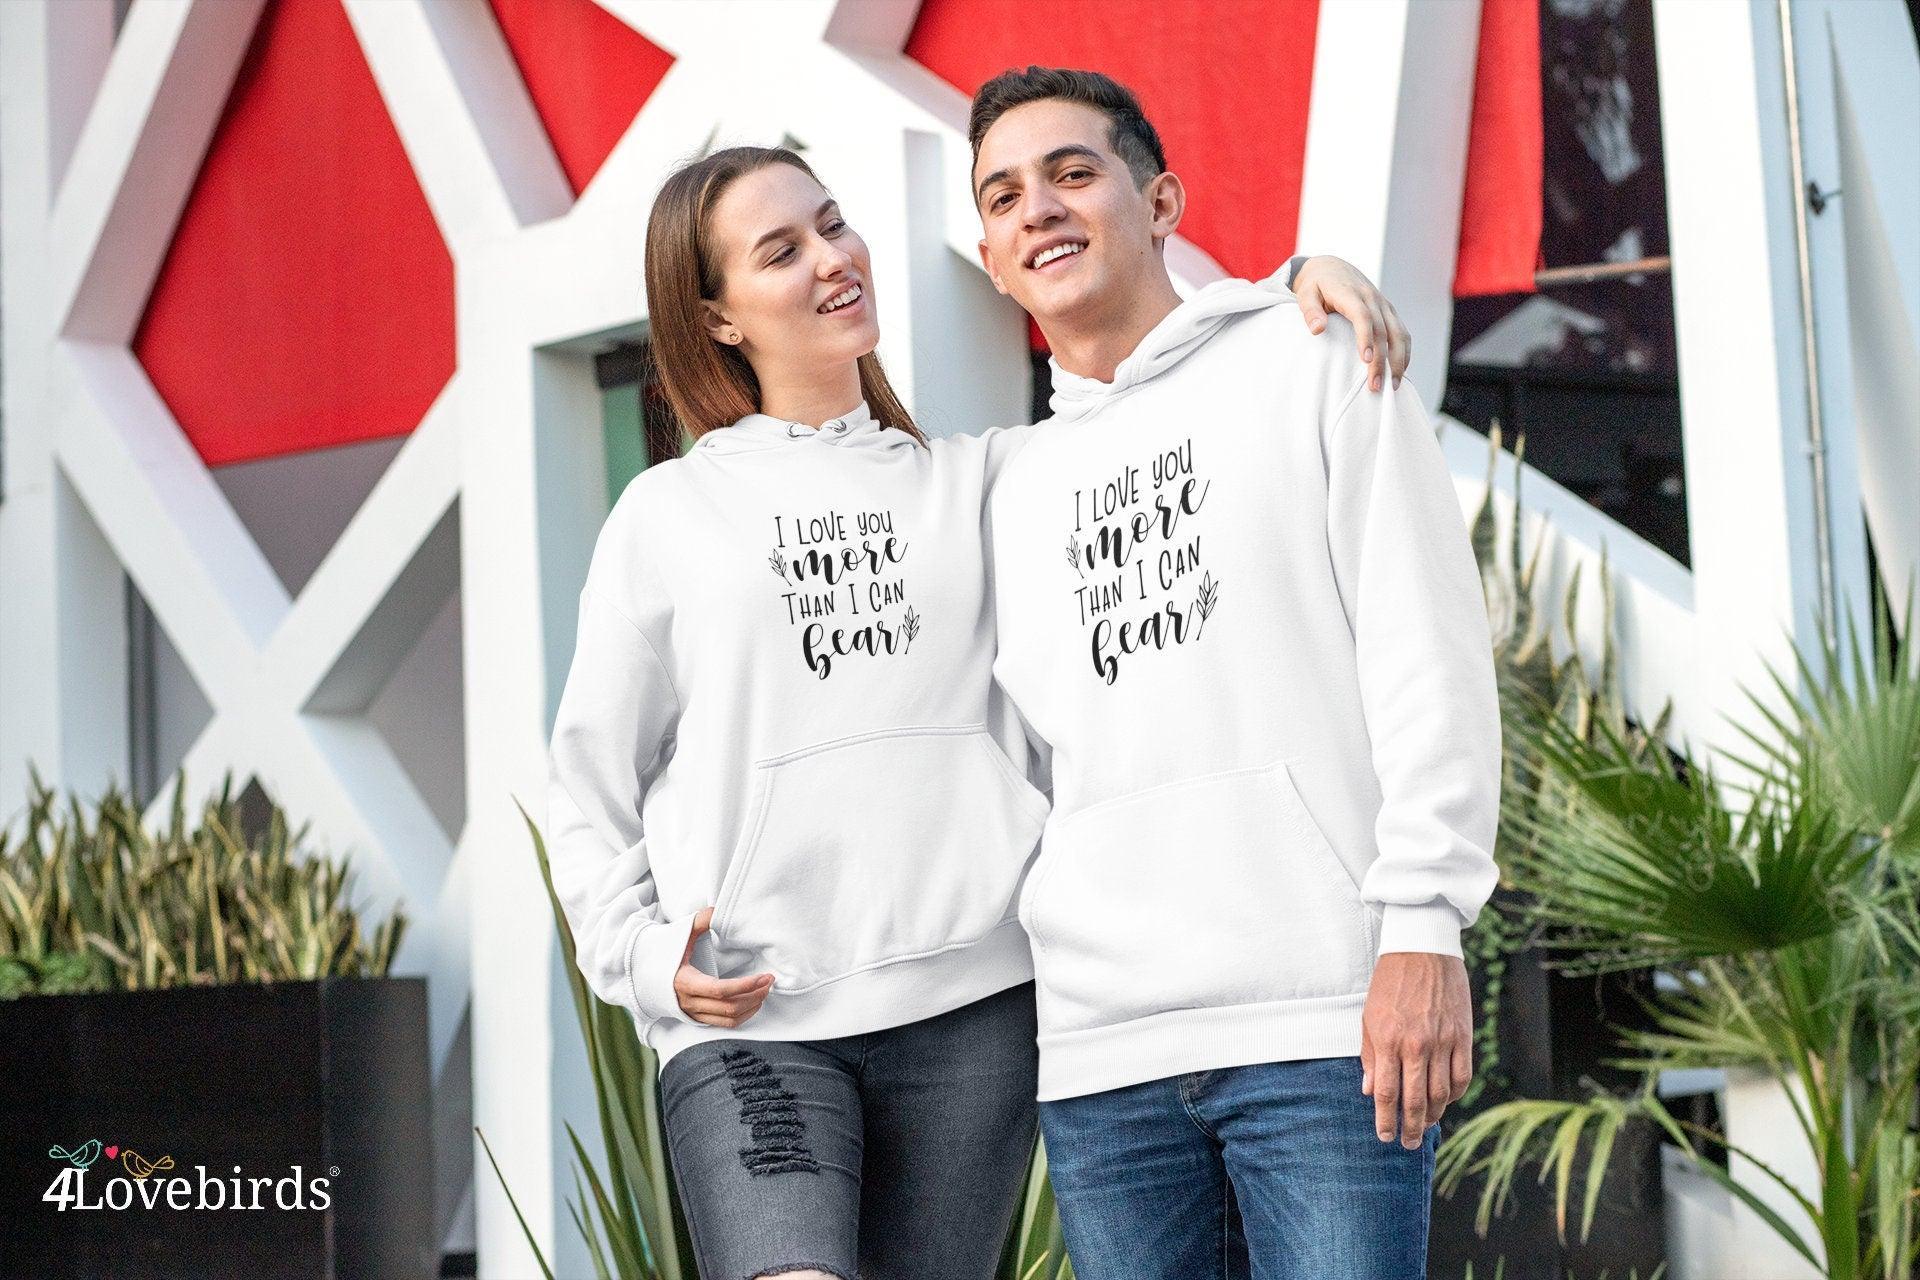 I love you more than I can bear Hoodie, Lovers matching T-shirt, Gift for Couples, Valentine Sweatshirt, Boyfriend and Girlfriend Longsleeve - 4Lovebirds